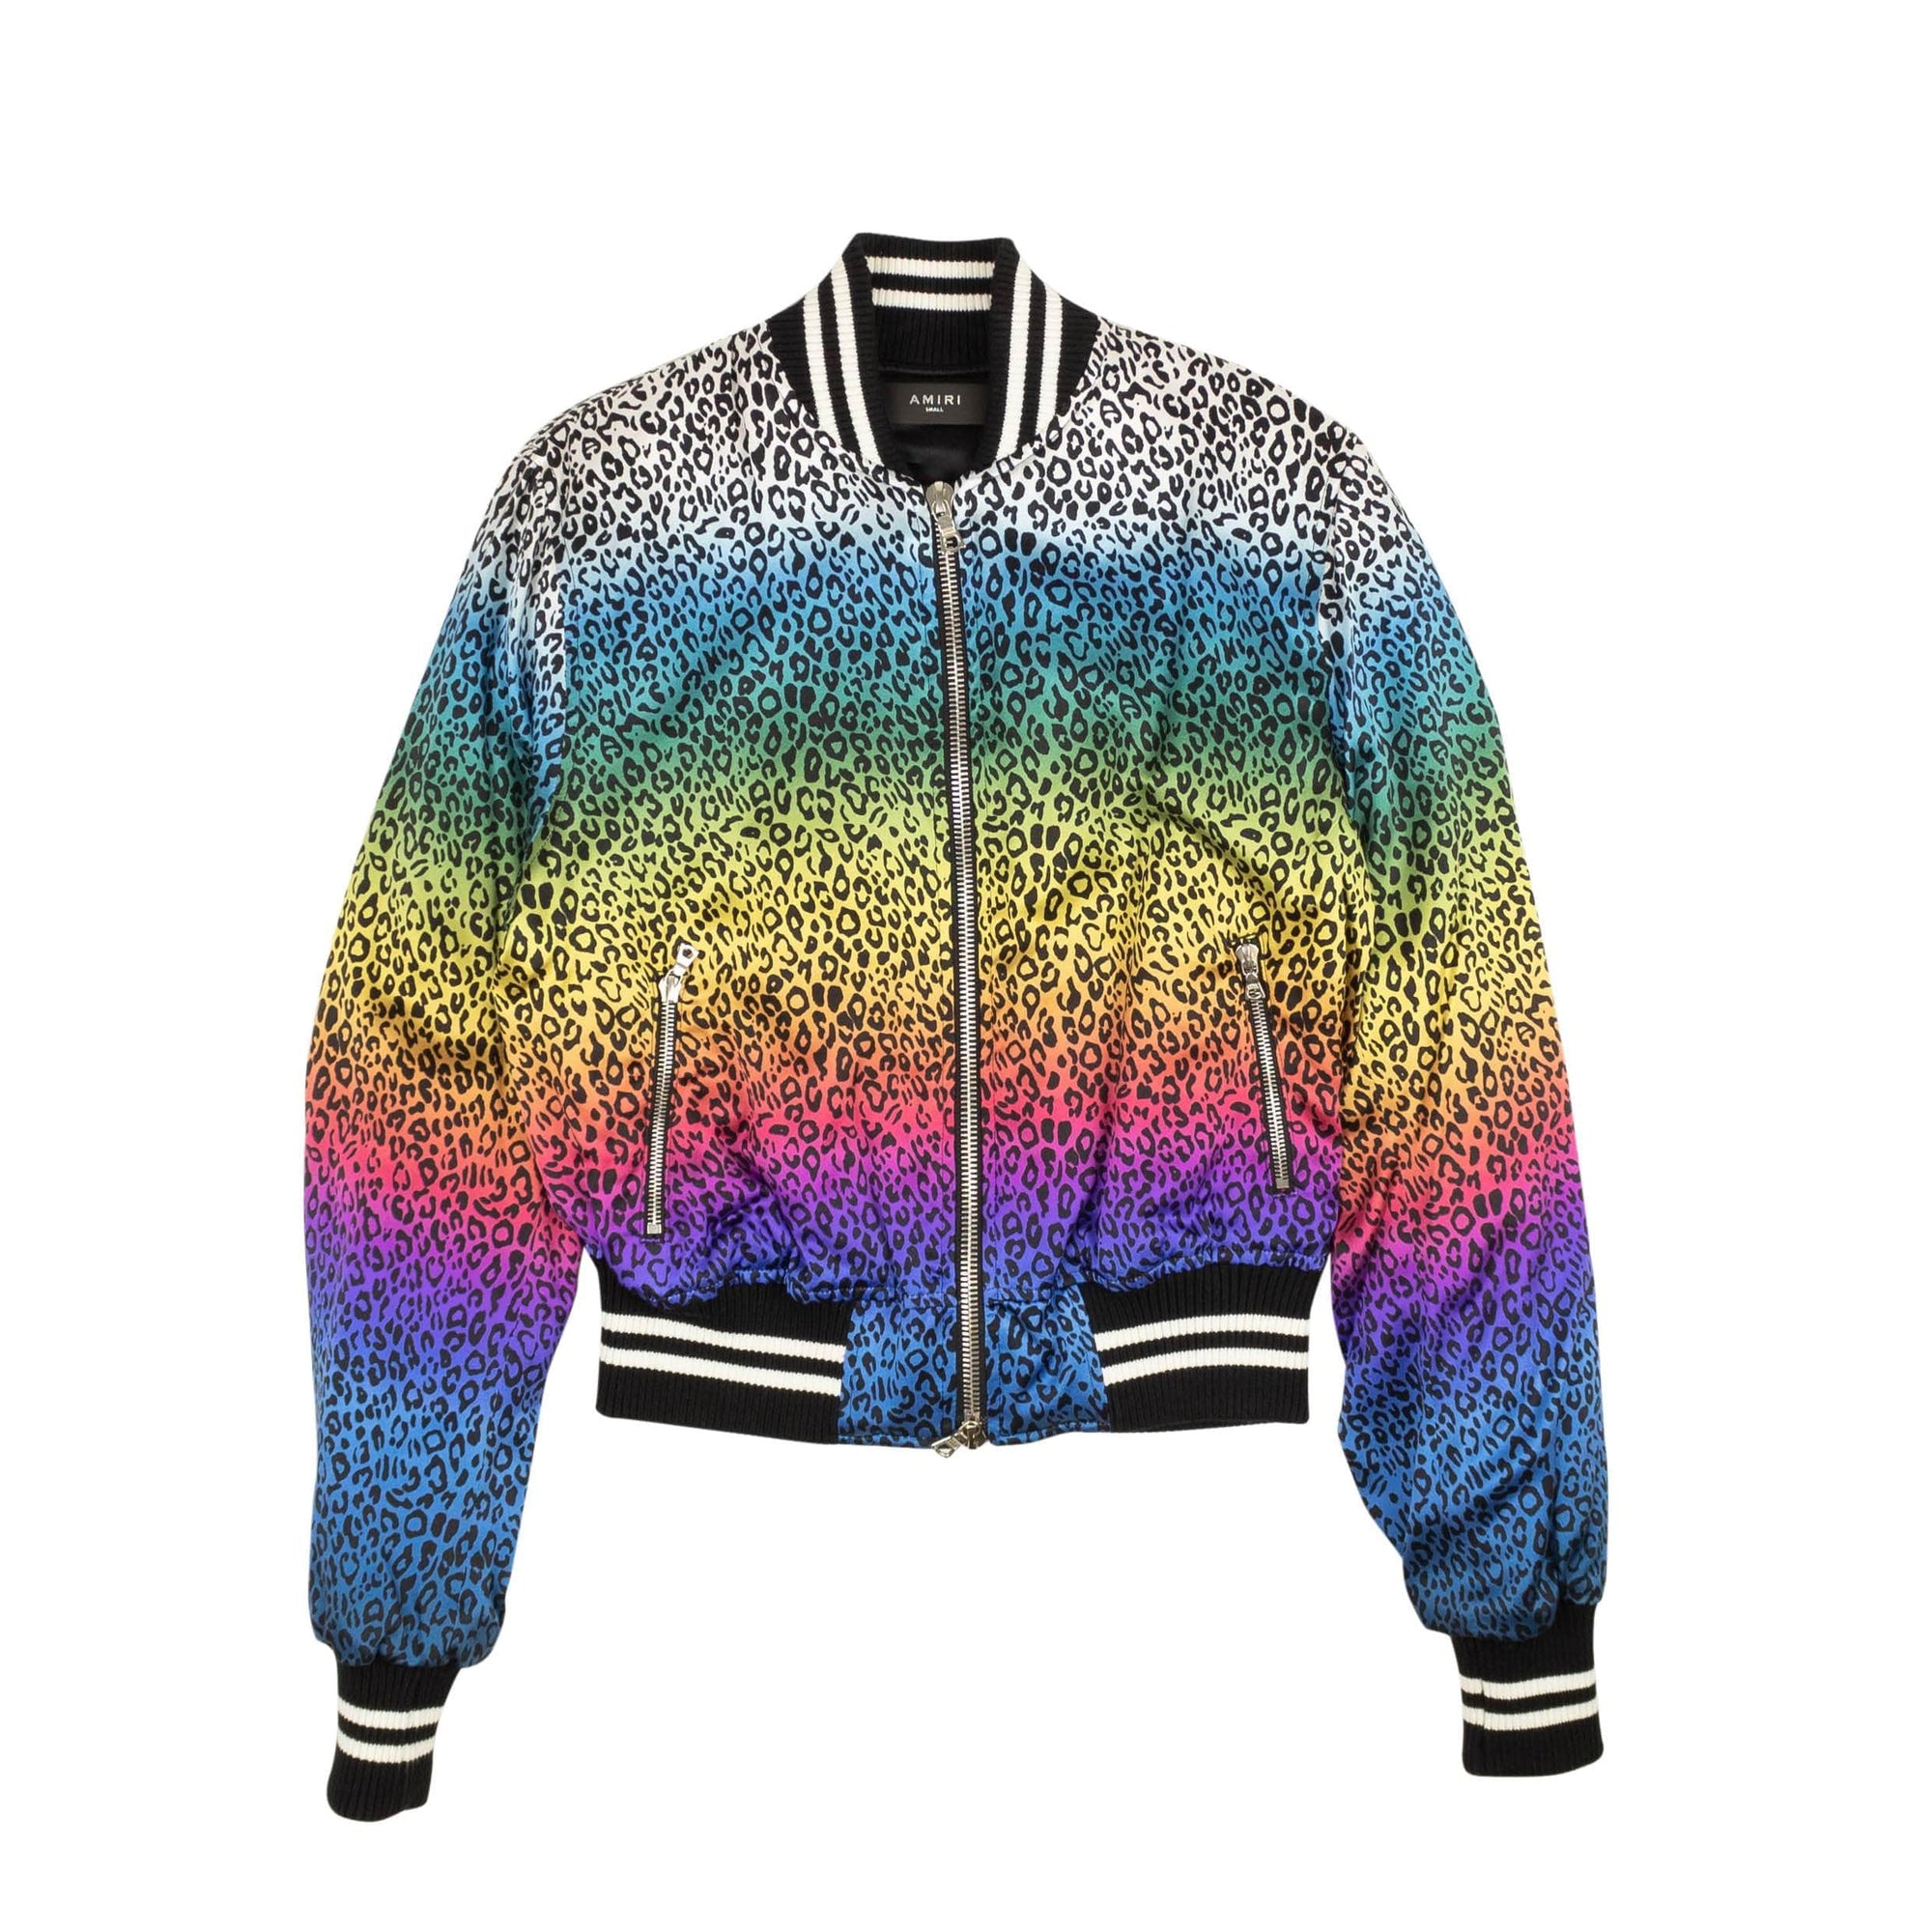 Amiri 250-500, amiri, channelenable-all, chicmi, couponcollection, gender-womens, main-clothing, size-m, size-s, size-xs, SPO, womens-bombers Black Silk Rainbow Leopard Bomber Jacket